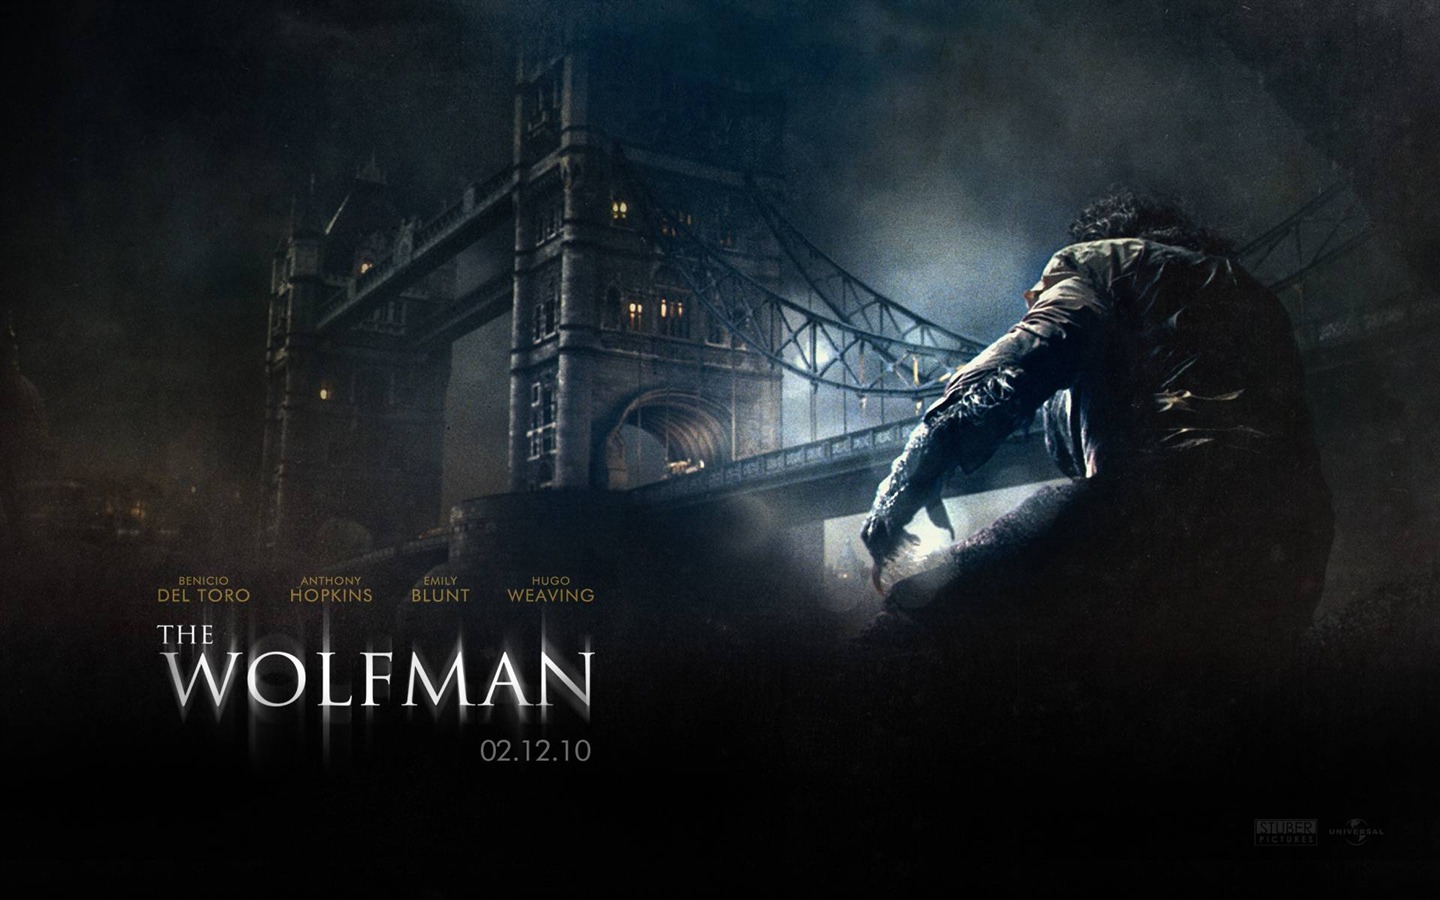 The Wolfman Movie Wallpapers #5 - 1440x900